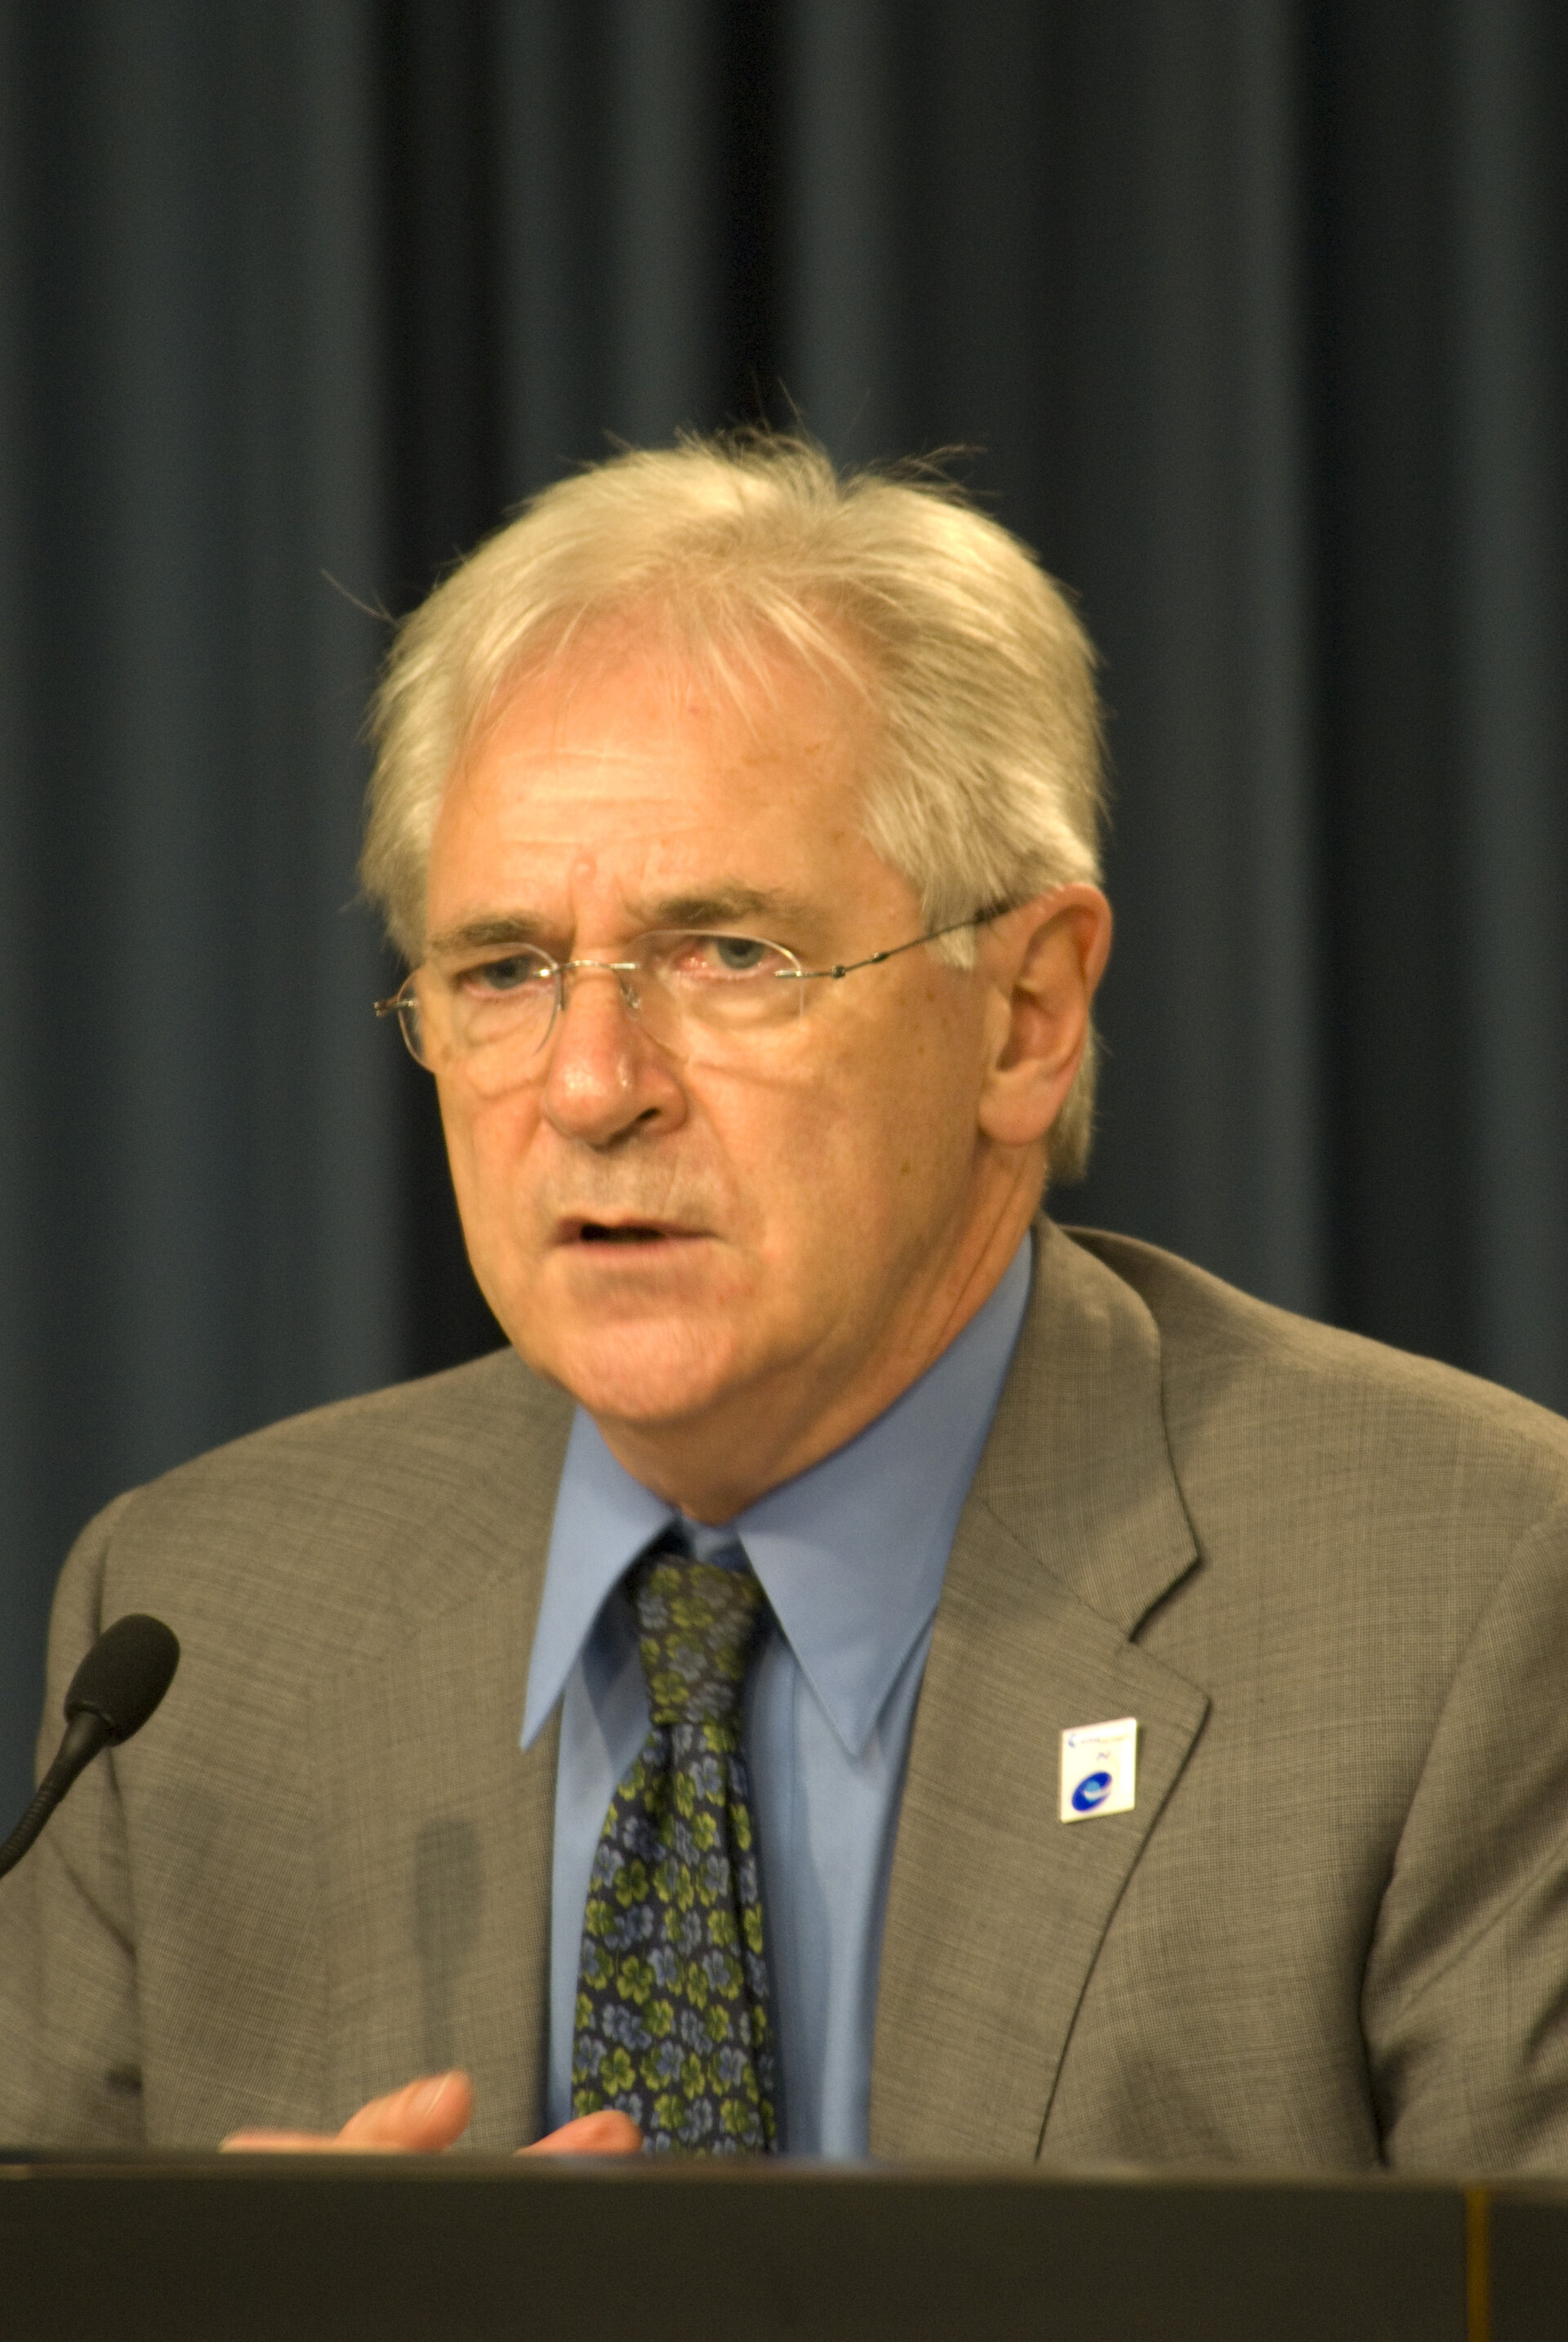 Alan Thirkettle during the ESA press briefing at Kennedy Space Center ahead of the Columbus Mission